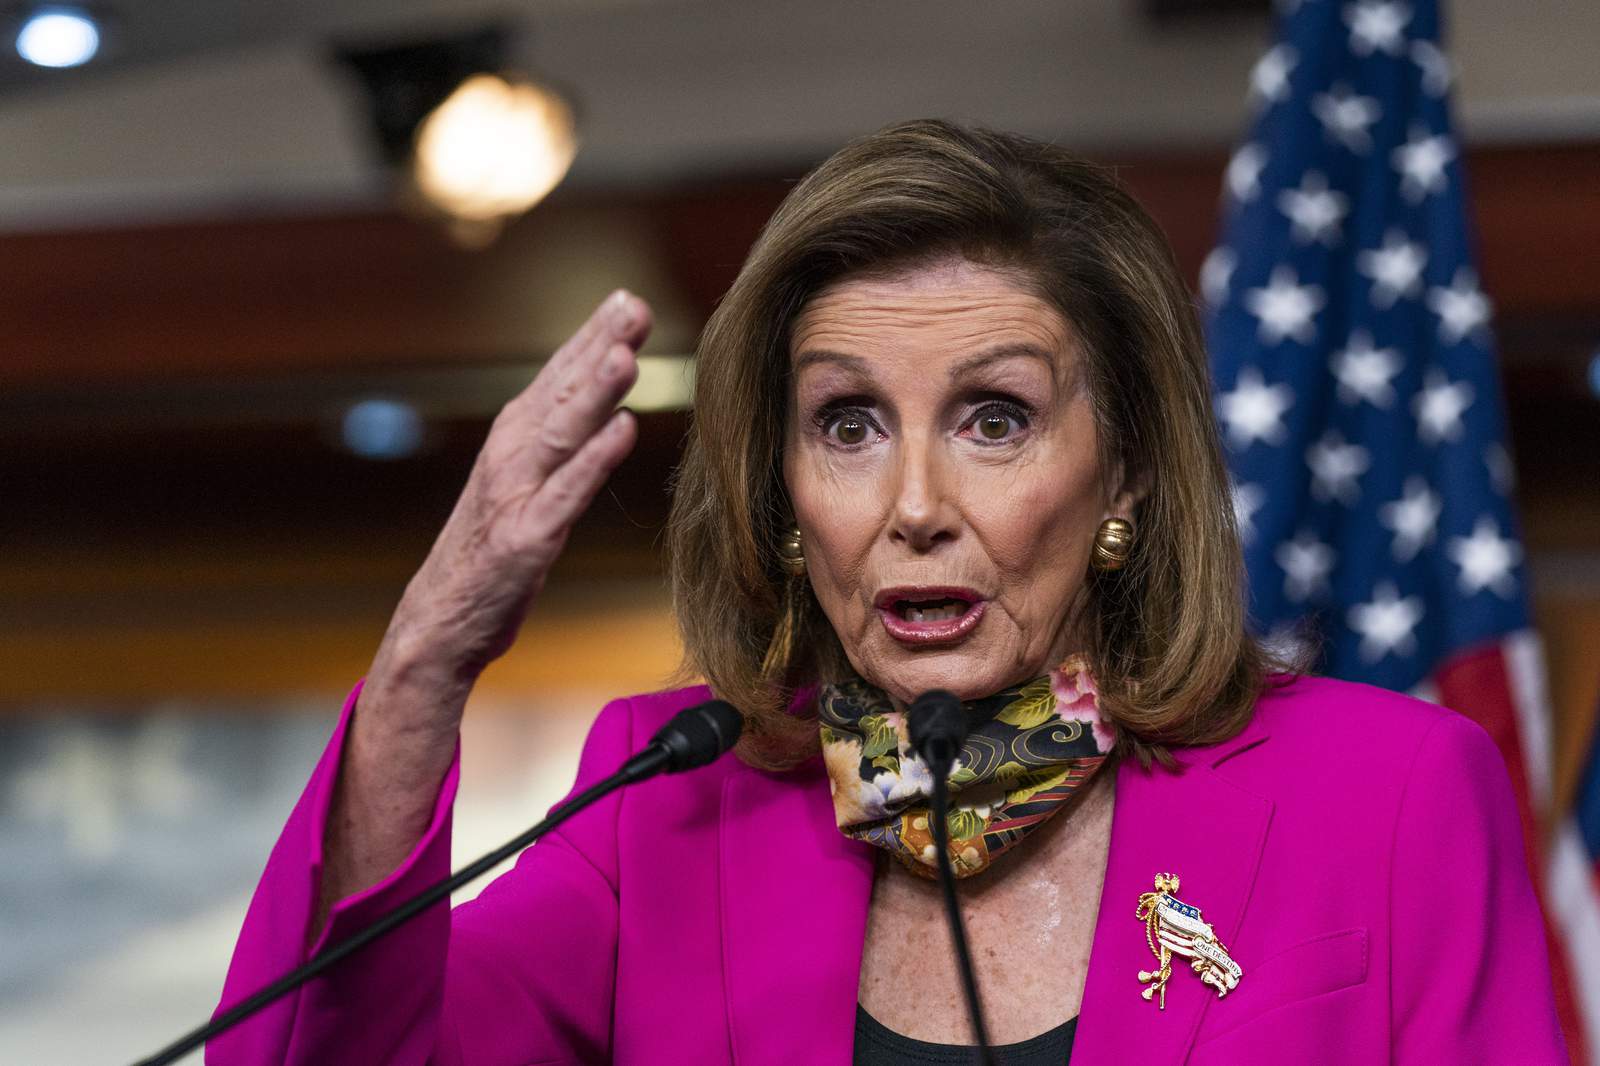 Pelosi to church: 'Follow science' on COVID-19 restrictions